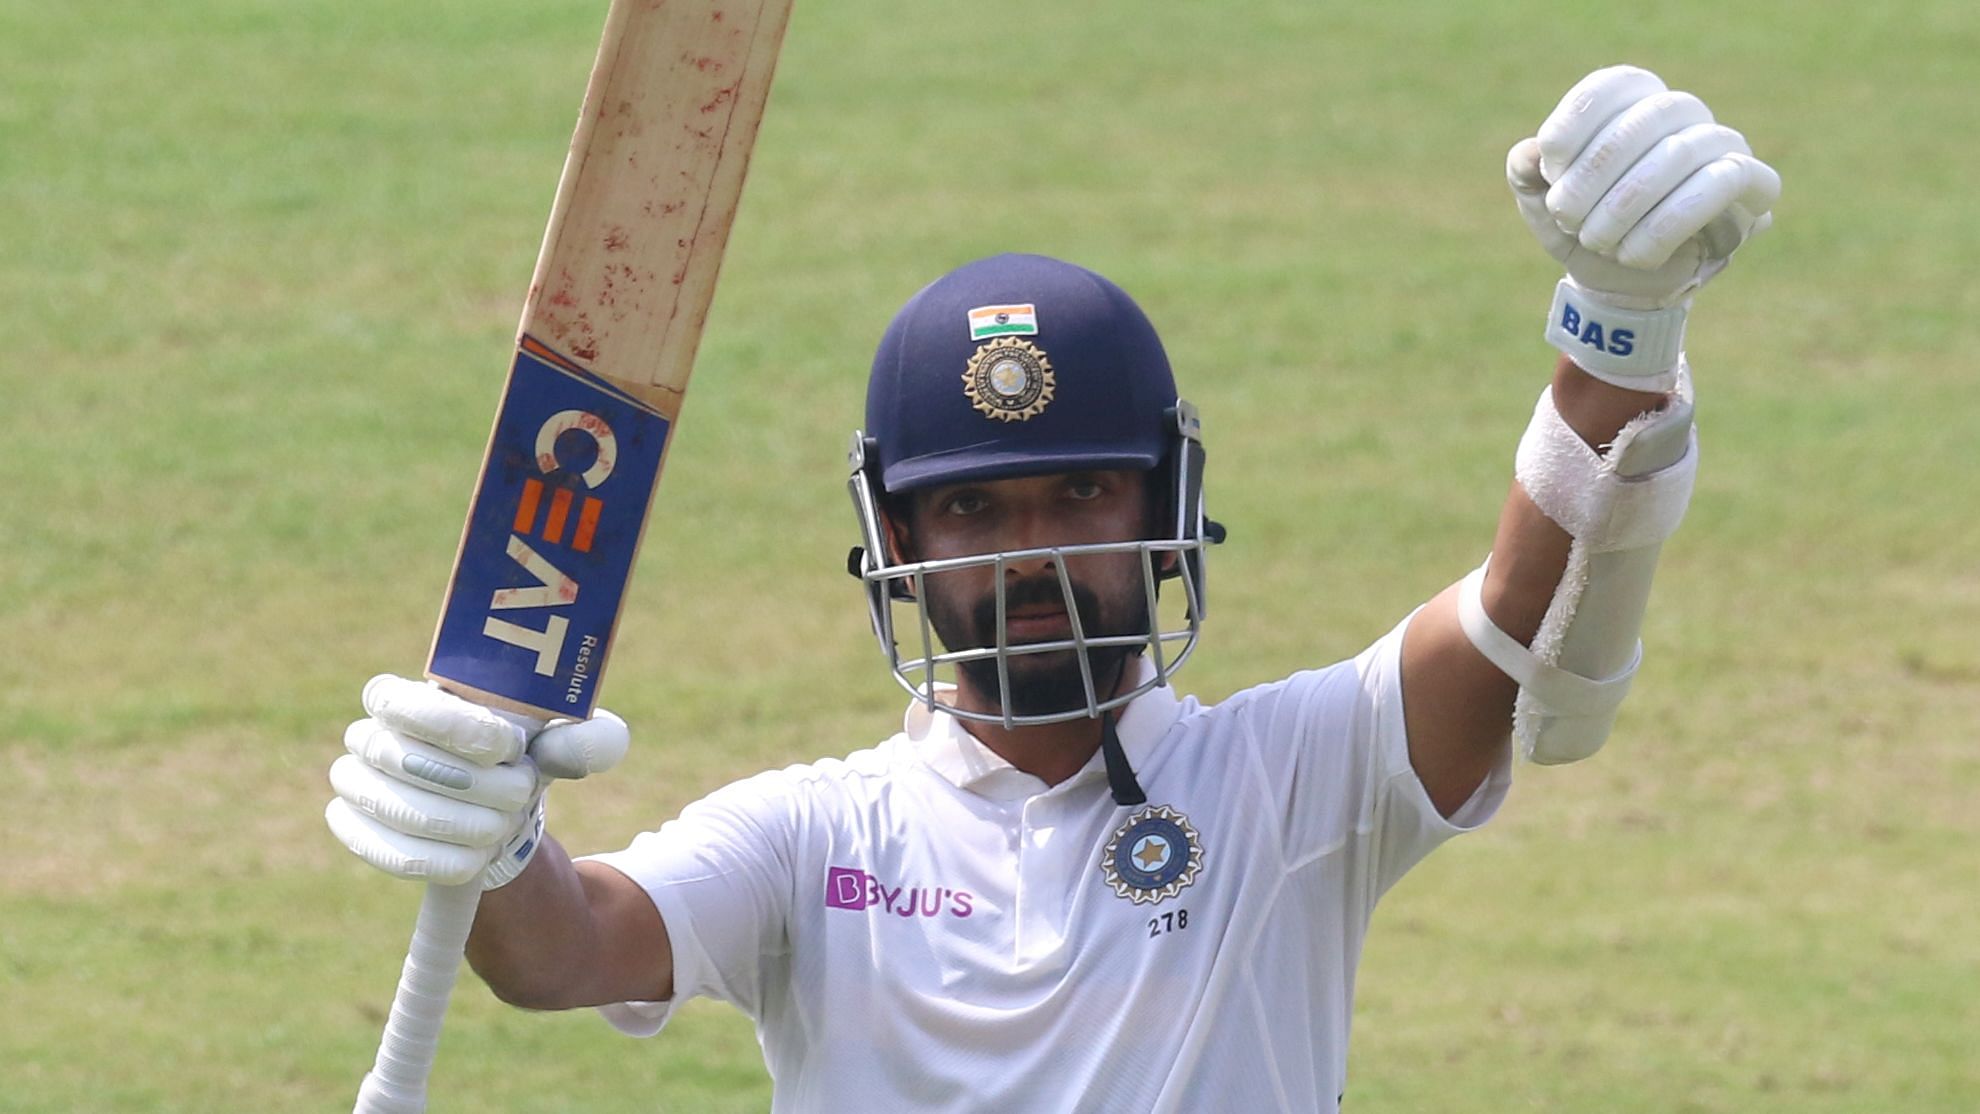 Ajinkya Rahane scored a century on the fourth and final day of the second unofficial Test that India ‘A’ played against New Zealand ‘A’.